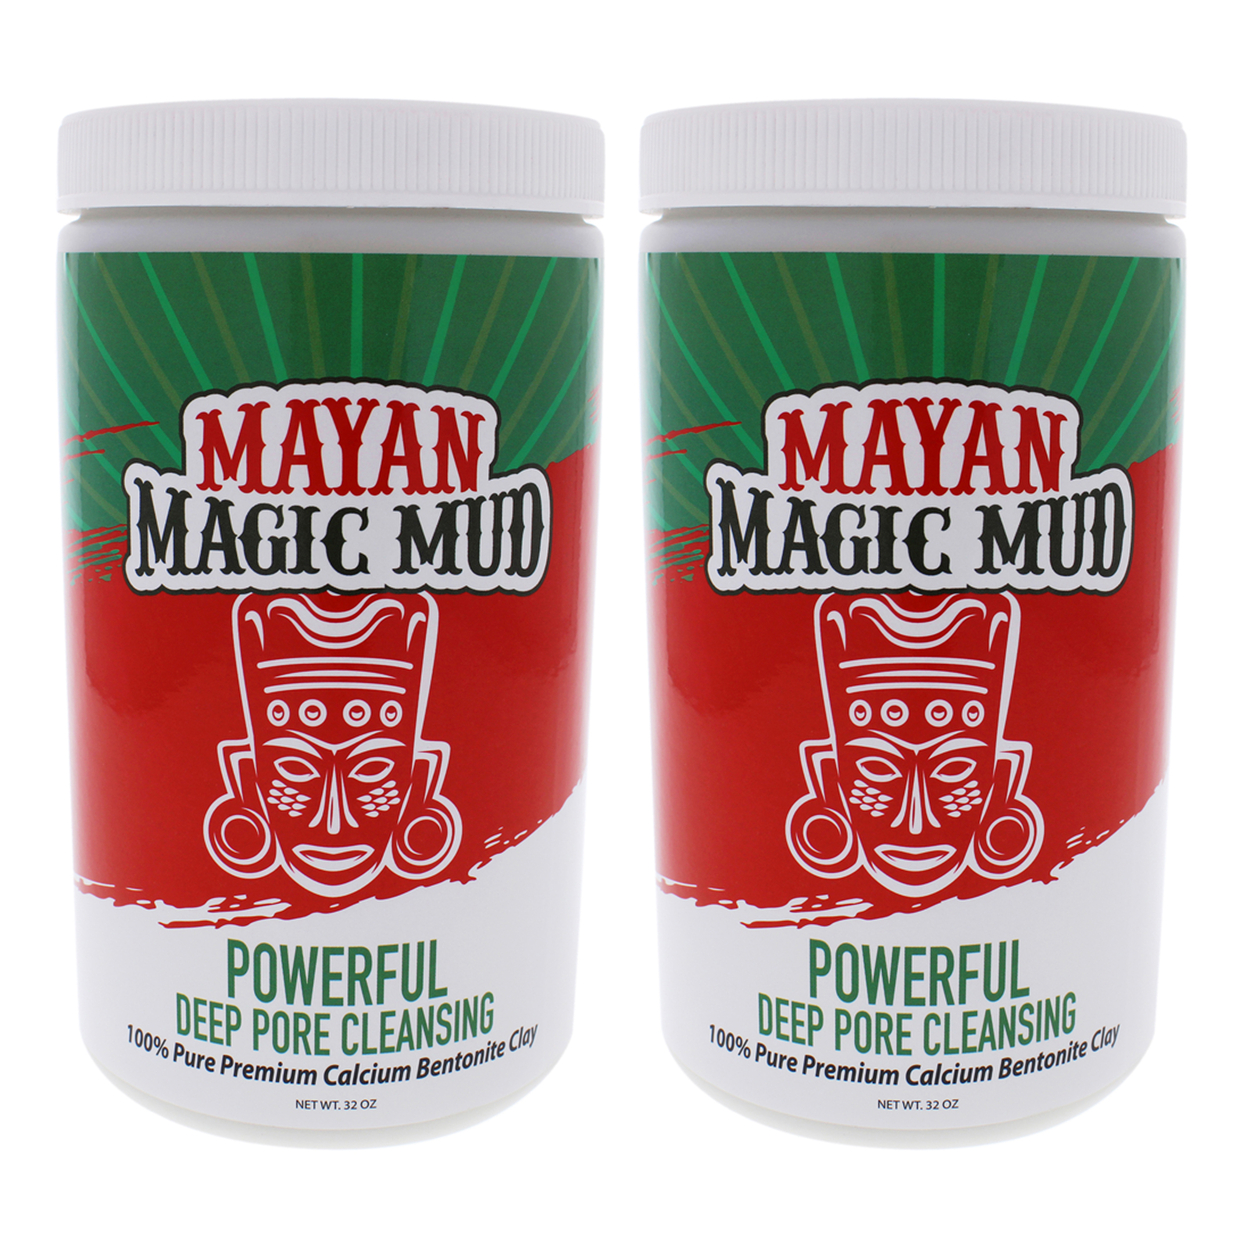 Mayan Magic Mud Powerful Deep Pore Cleansing Clay - Pack Of 2 Cleanser 32 Oz